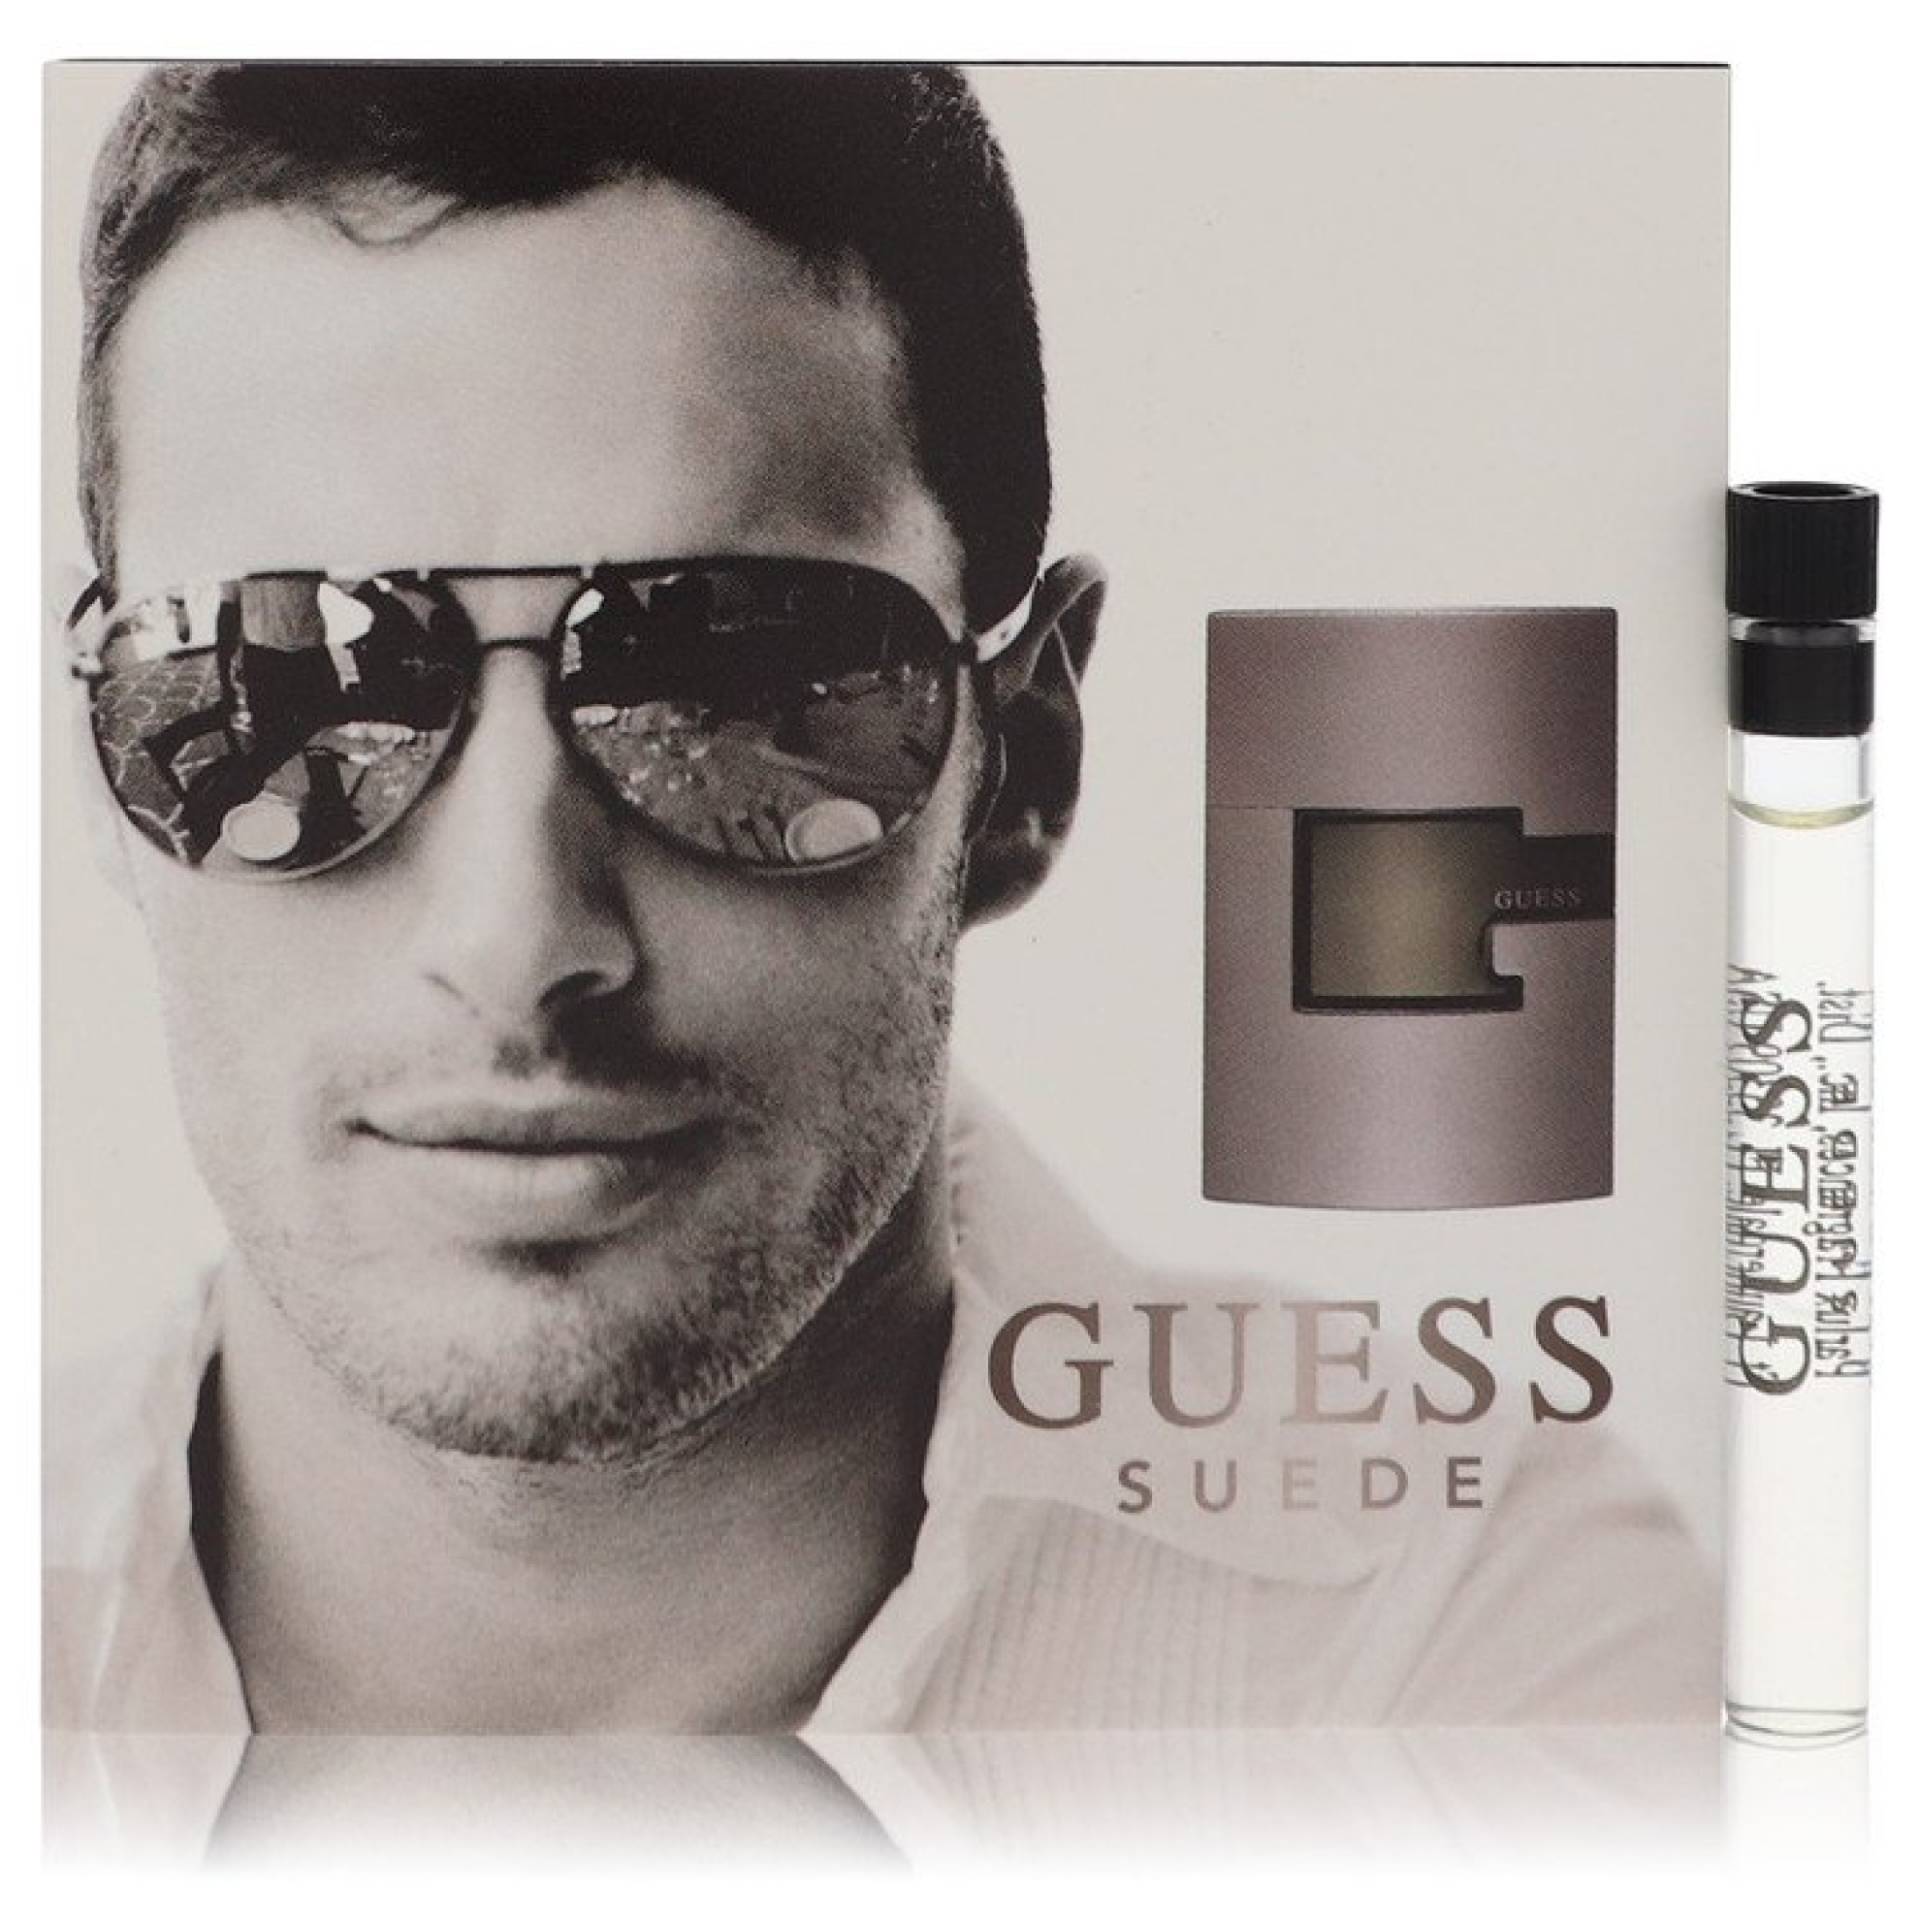 Guess Suede Vial (sample) 2 ml von Guess